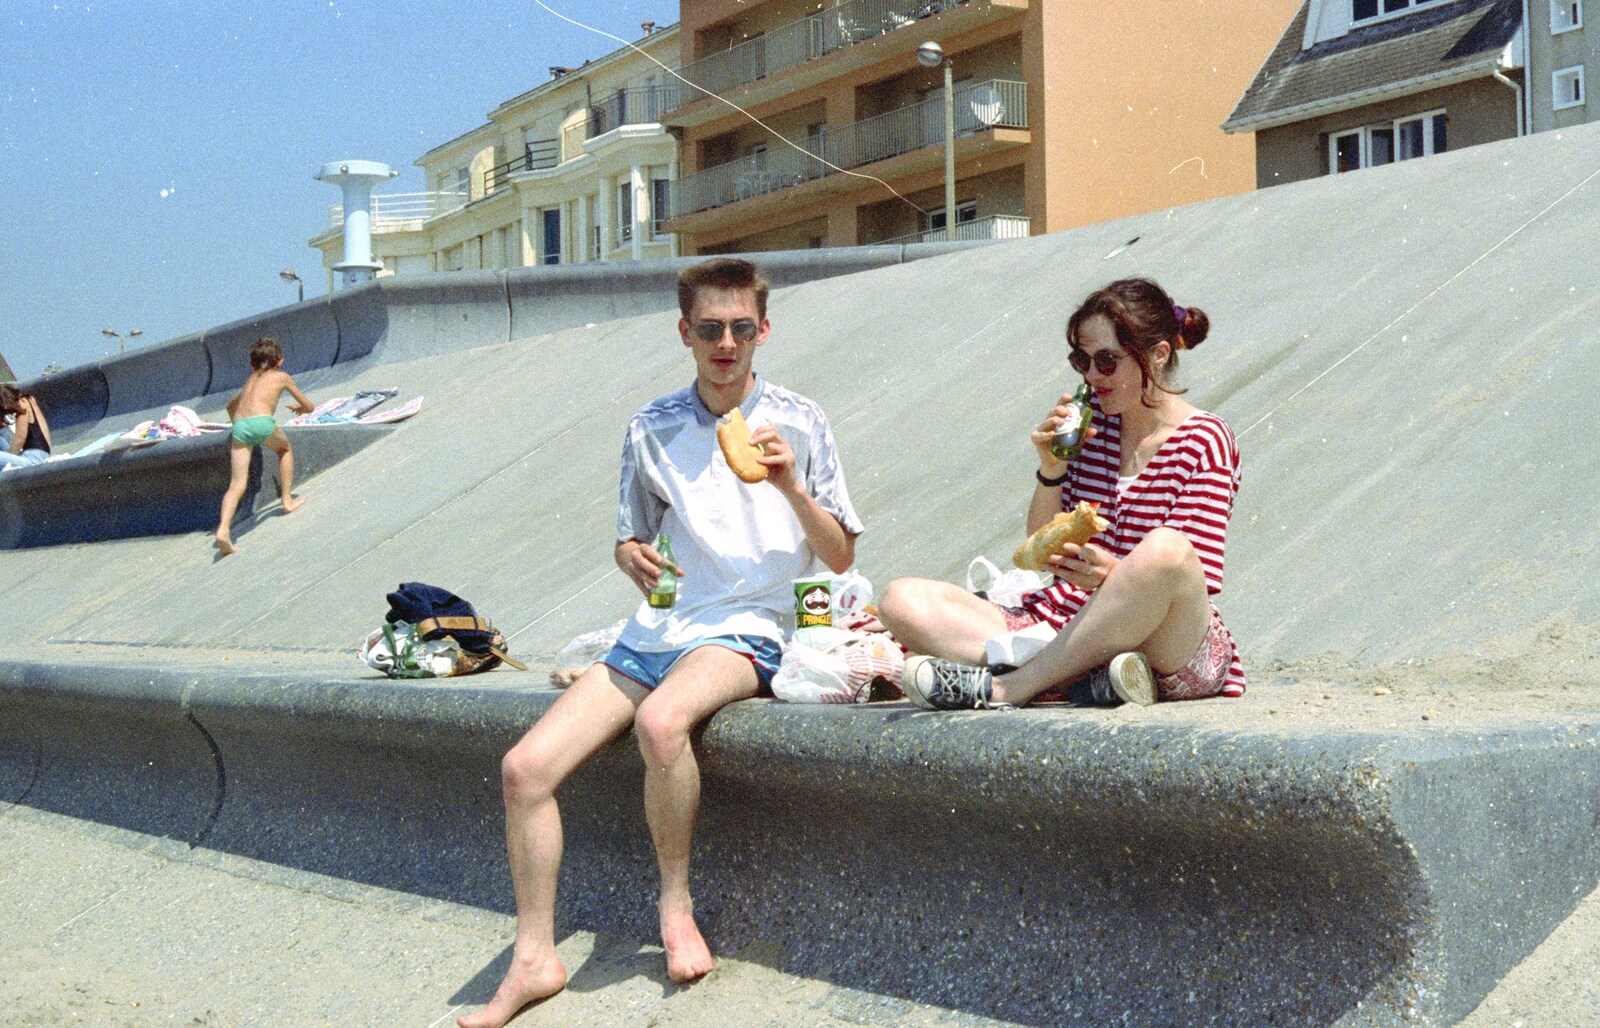 We scoff some sort of bread-based snack from A CISU Trip to Wimereux and the Swiss Rellies, France and Dorset - 6th July 1997